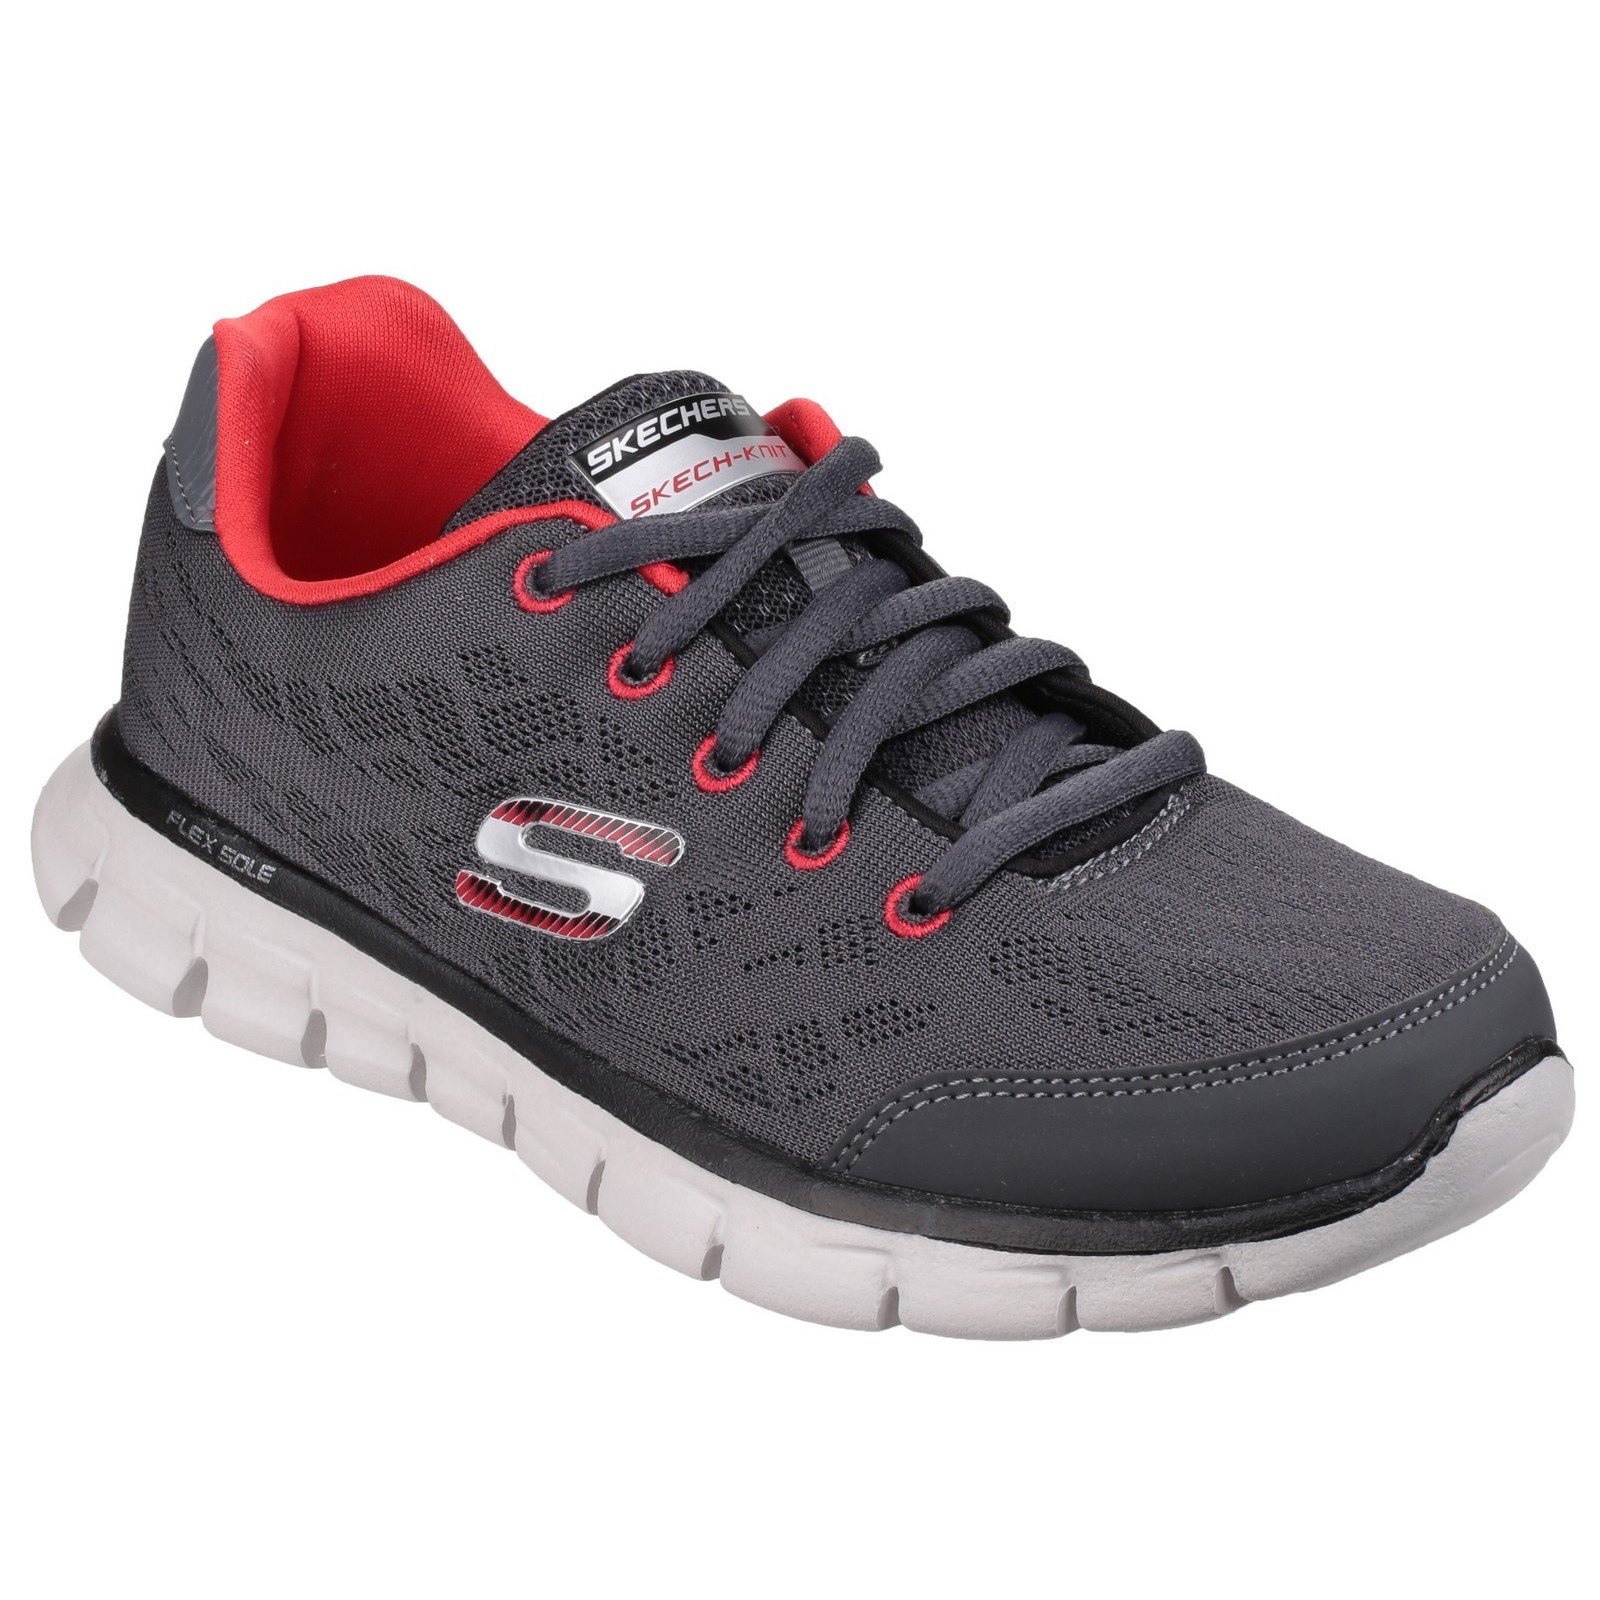 Skechers Kid's Synergy Fine Tune Lace up Trainer Multicolor 23918 - Grey/Red 12